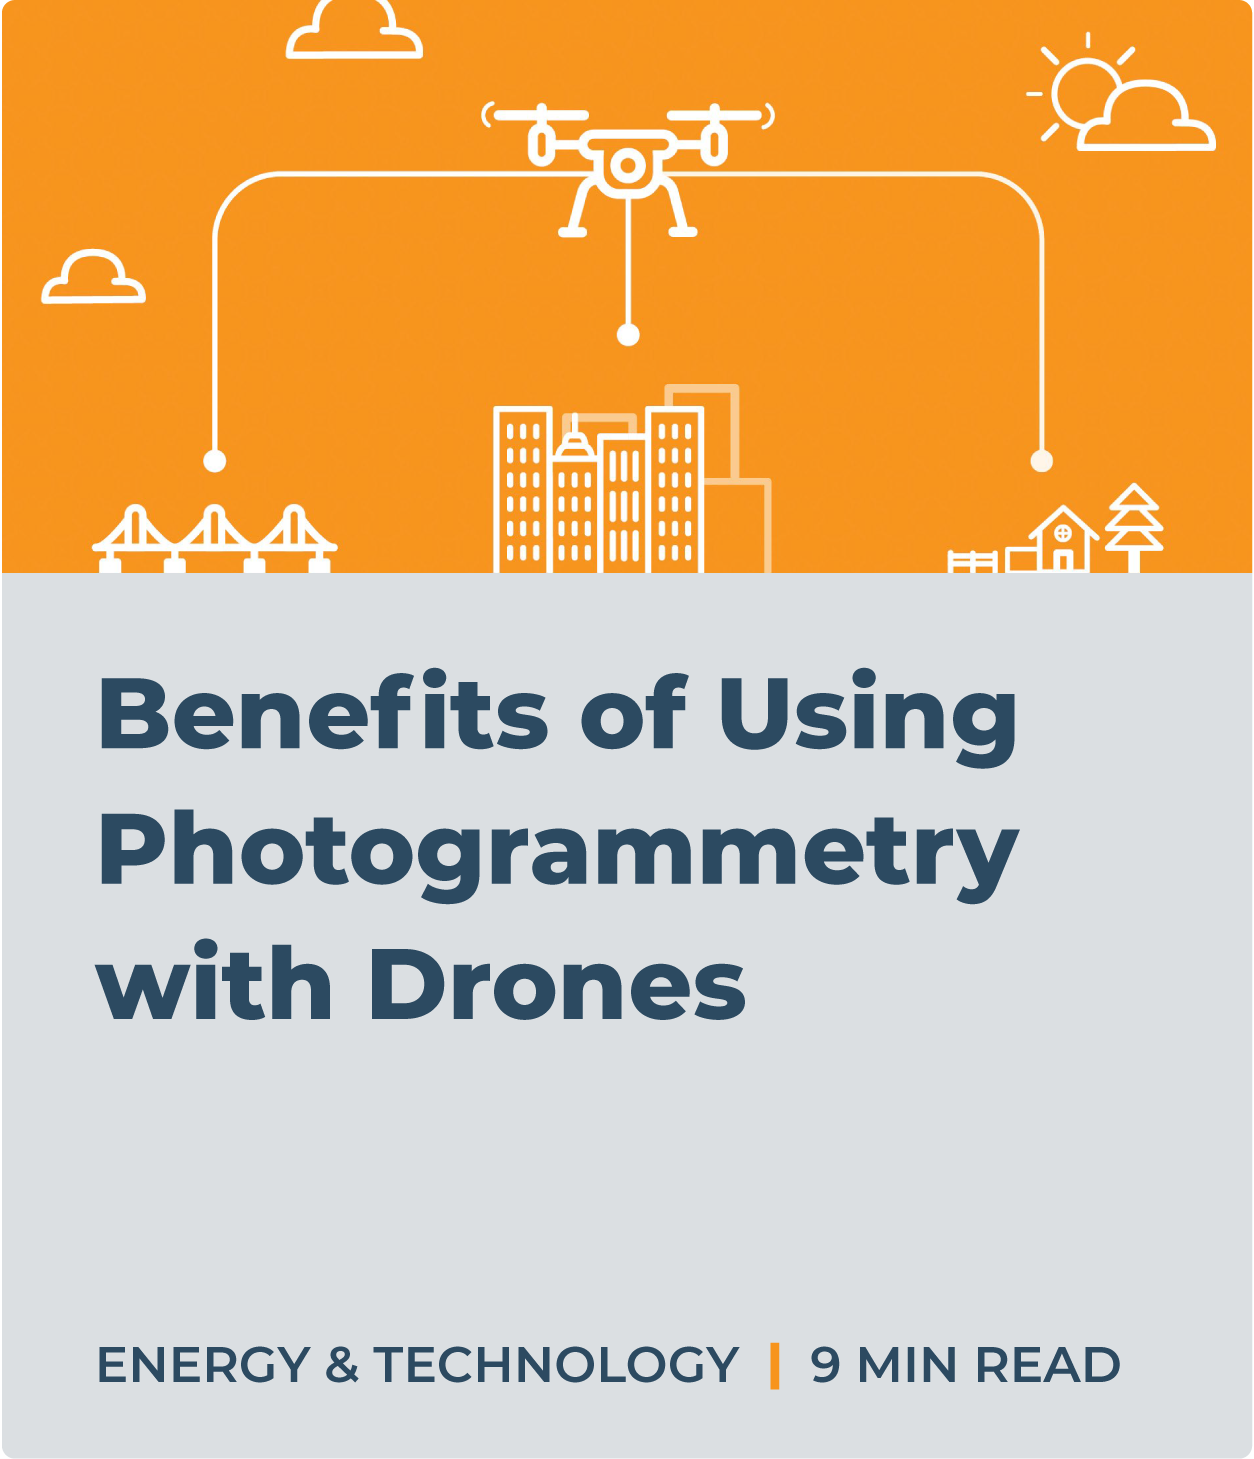 Benefit of Using Photogrammetry with Drones